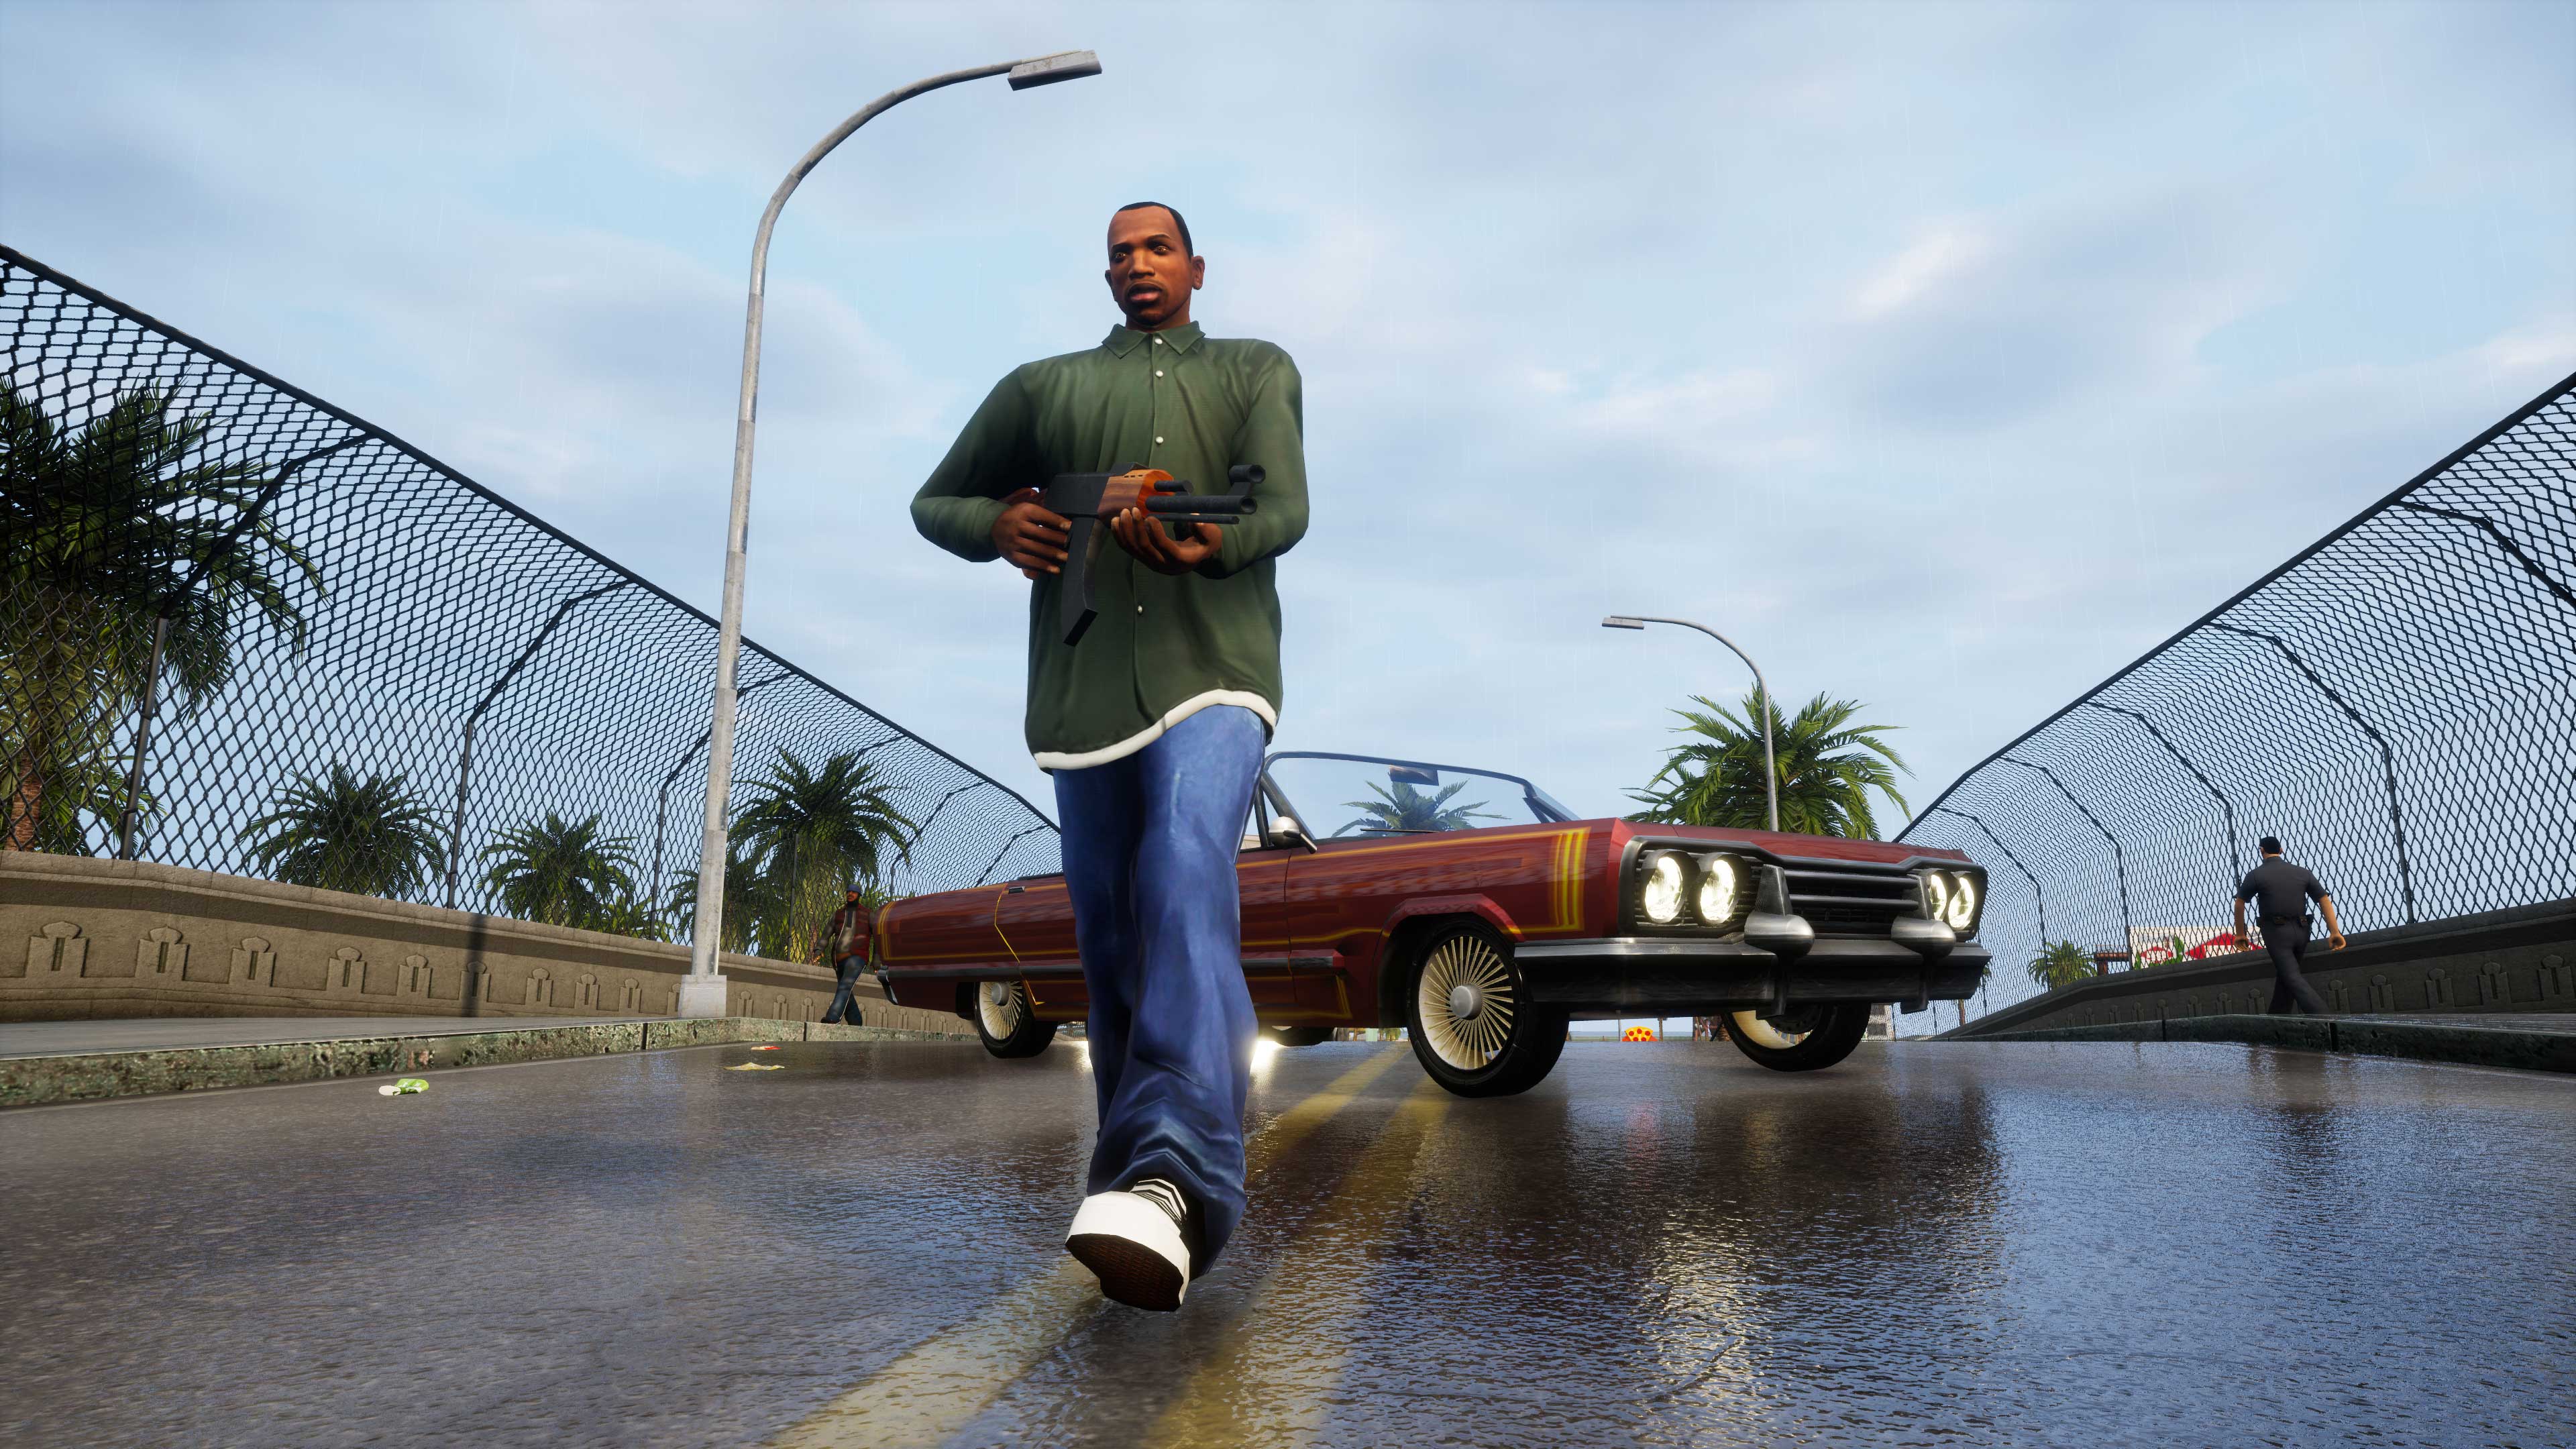 The San Andreas fog is irrelevant – the setting itself is the star of the GTA Trilogy | GamesRadar+